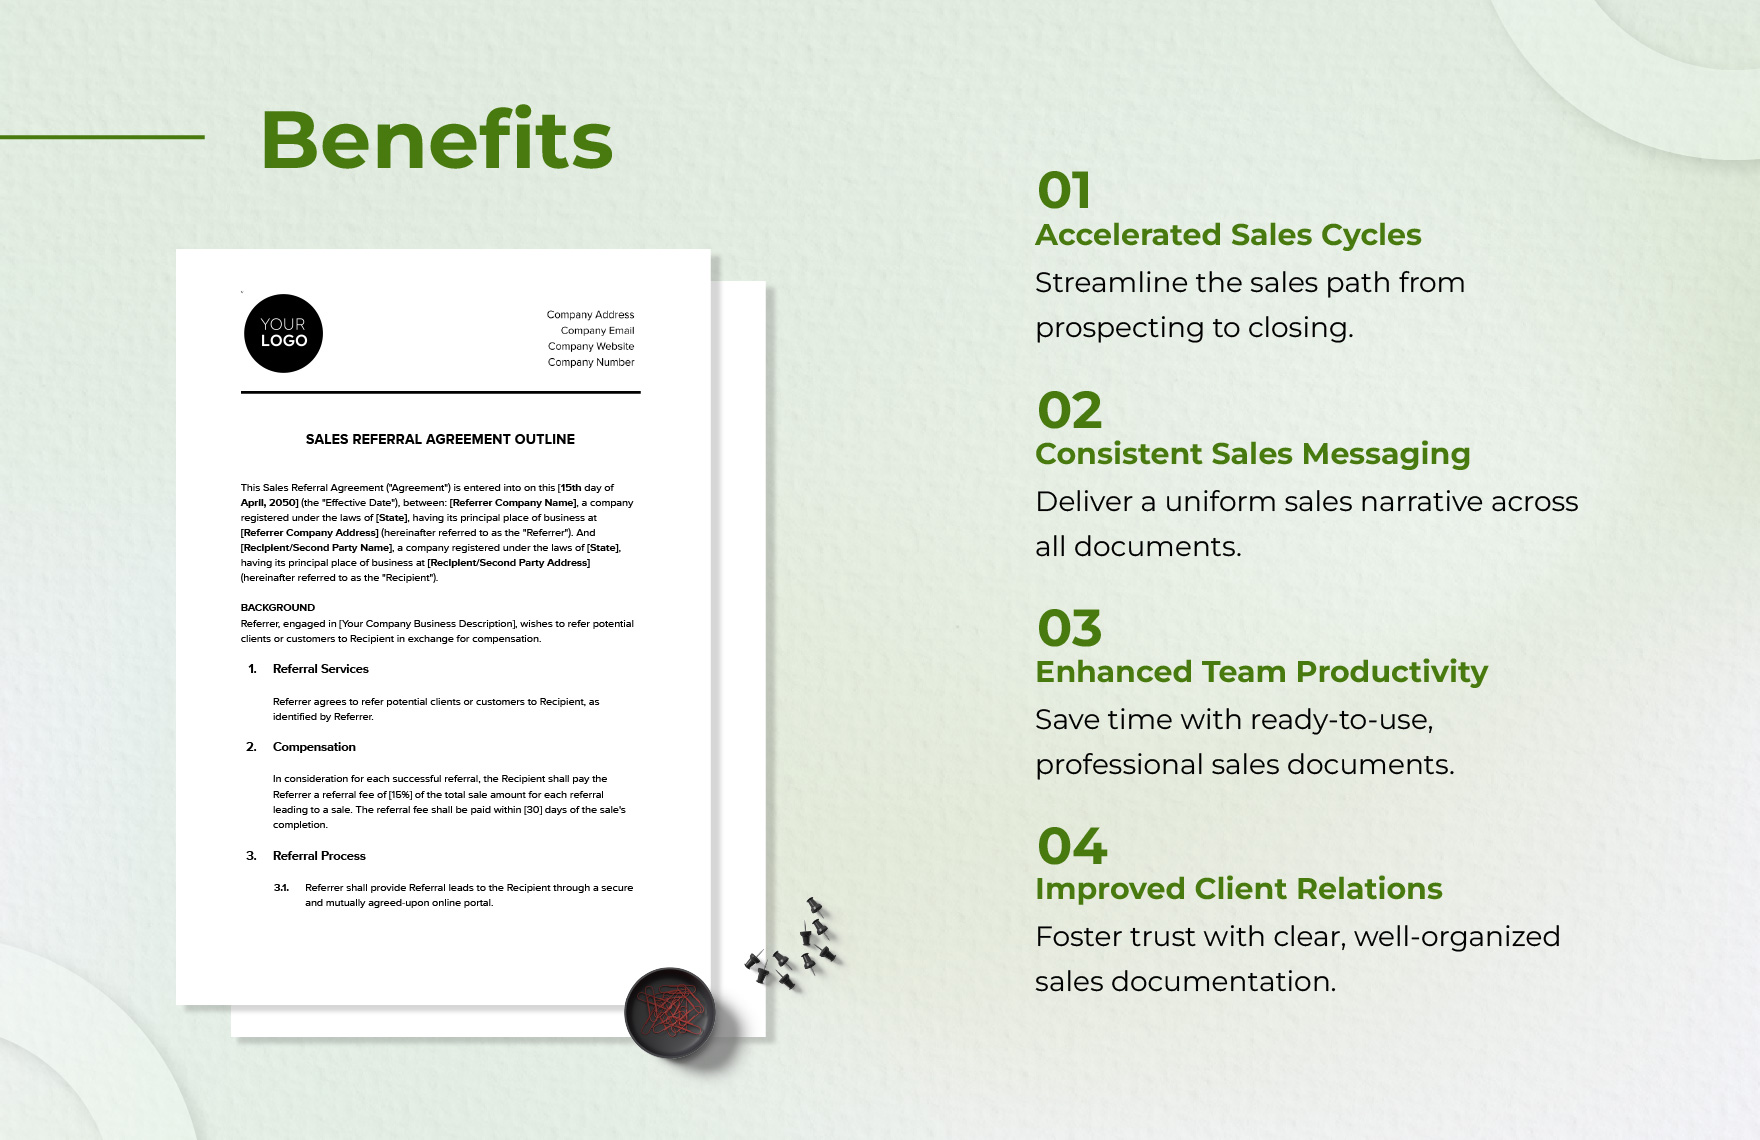 Sales Referral Agreement Outline Template